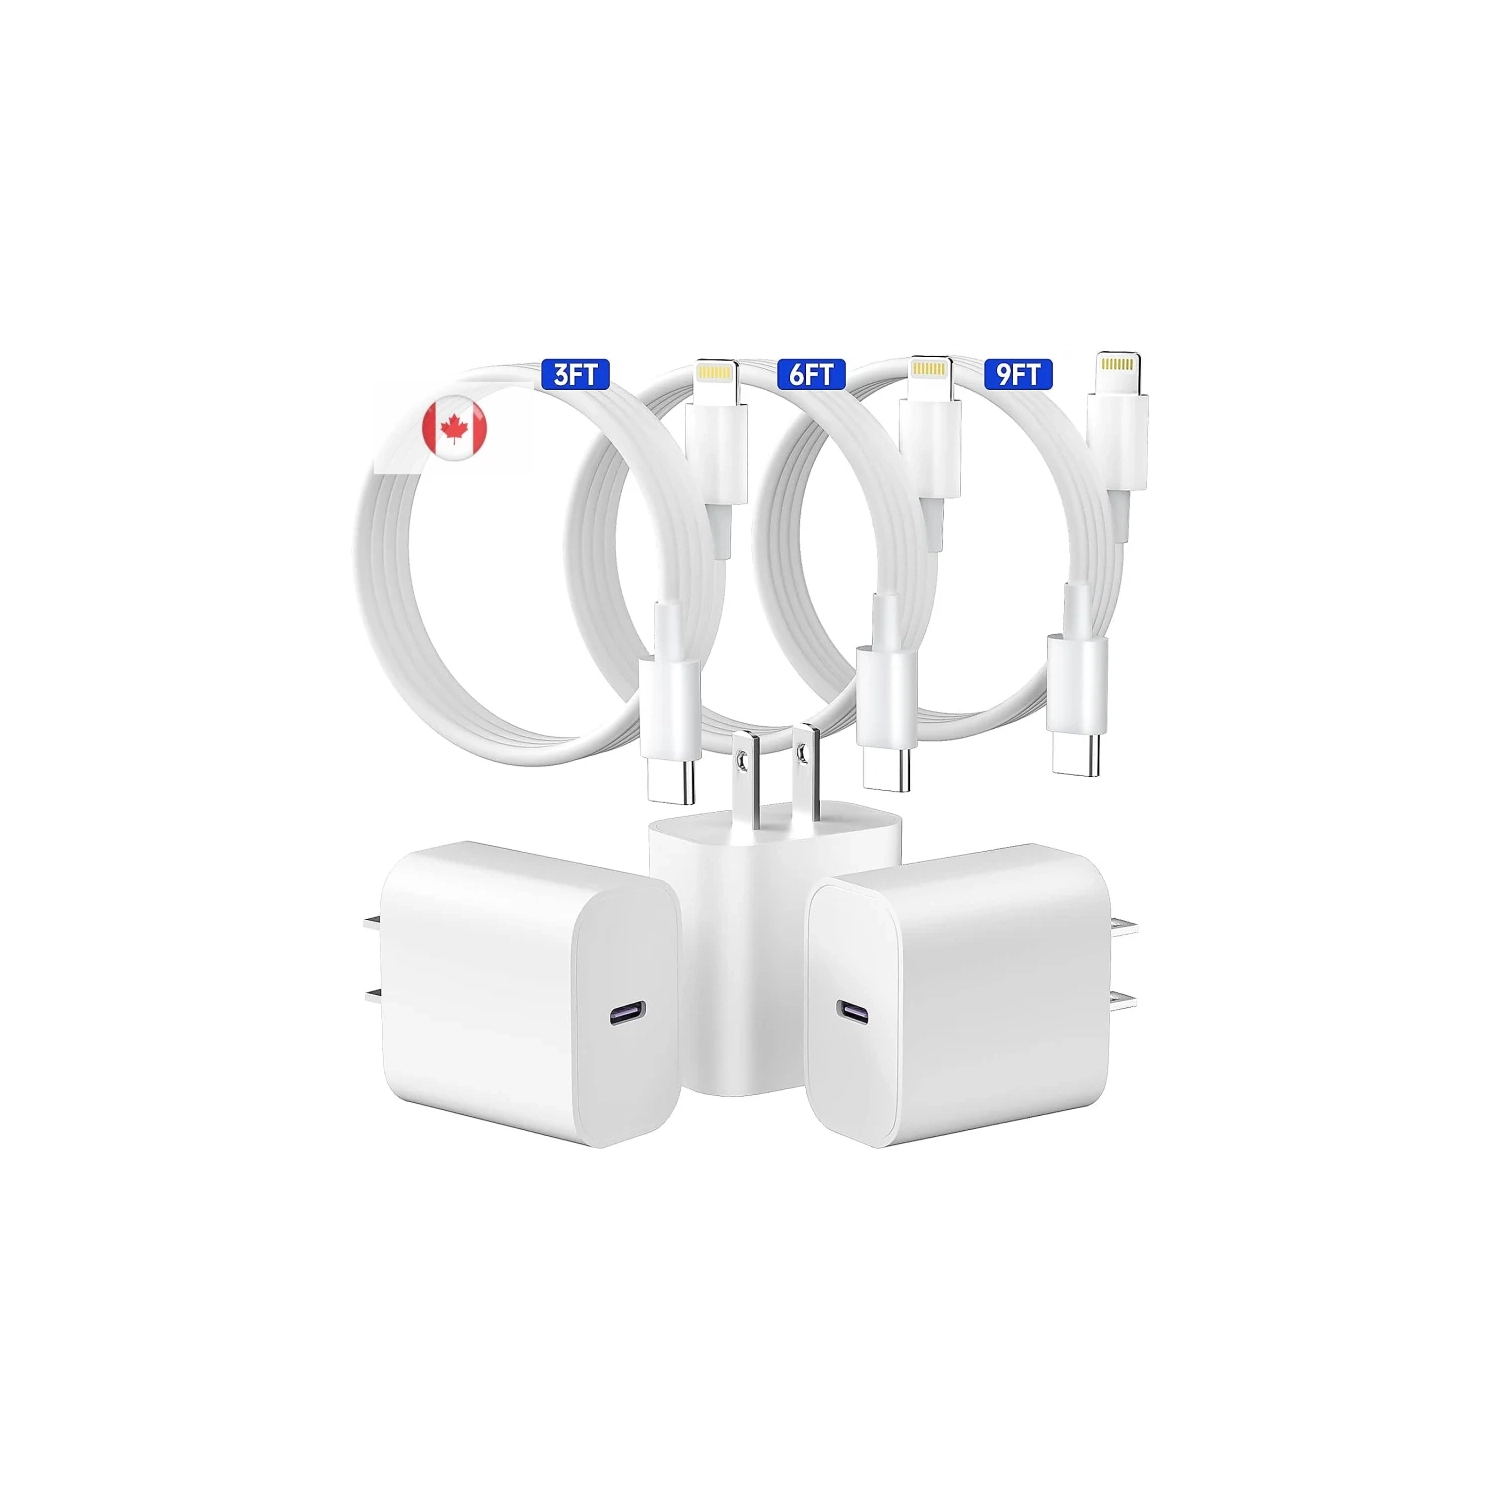 MFi Certified iPhone Fast Charger - 3 Pack 20W PD USB C Wall Charger block with USB C to Lightning Cable Cord [3FT-6FT-9FT] - Compatible with iPhone 14/13/12/11/XS/XR/X/8, iPad